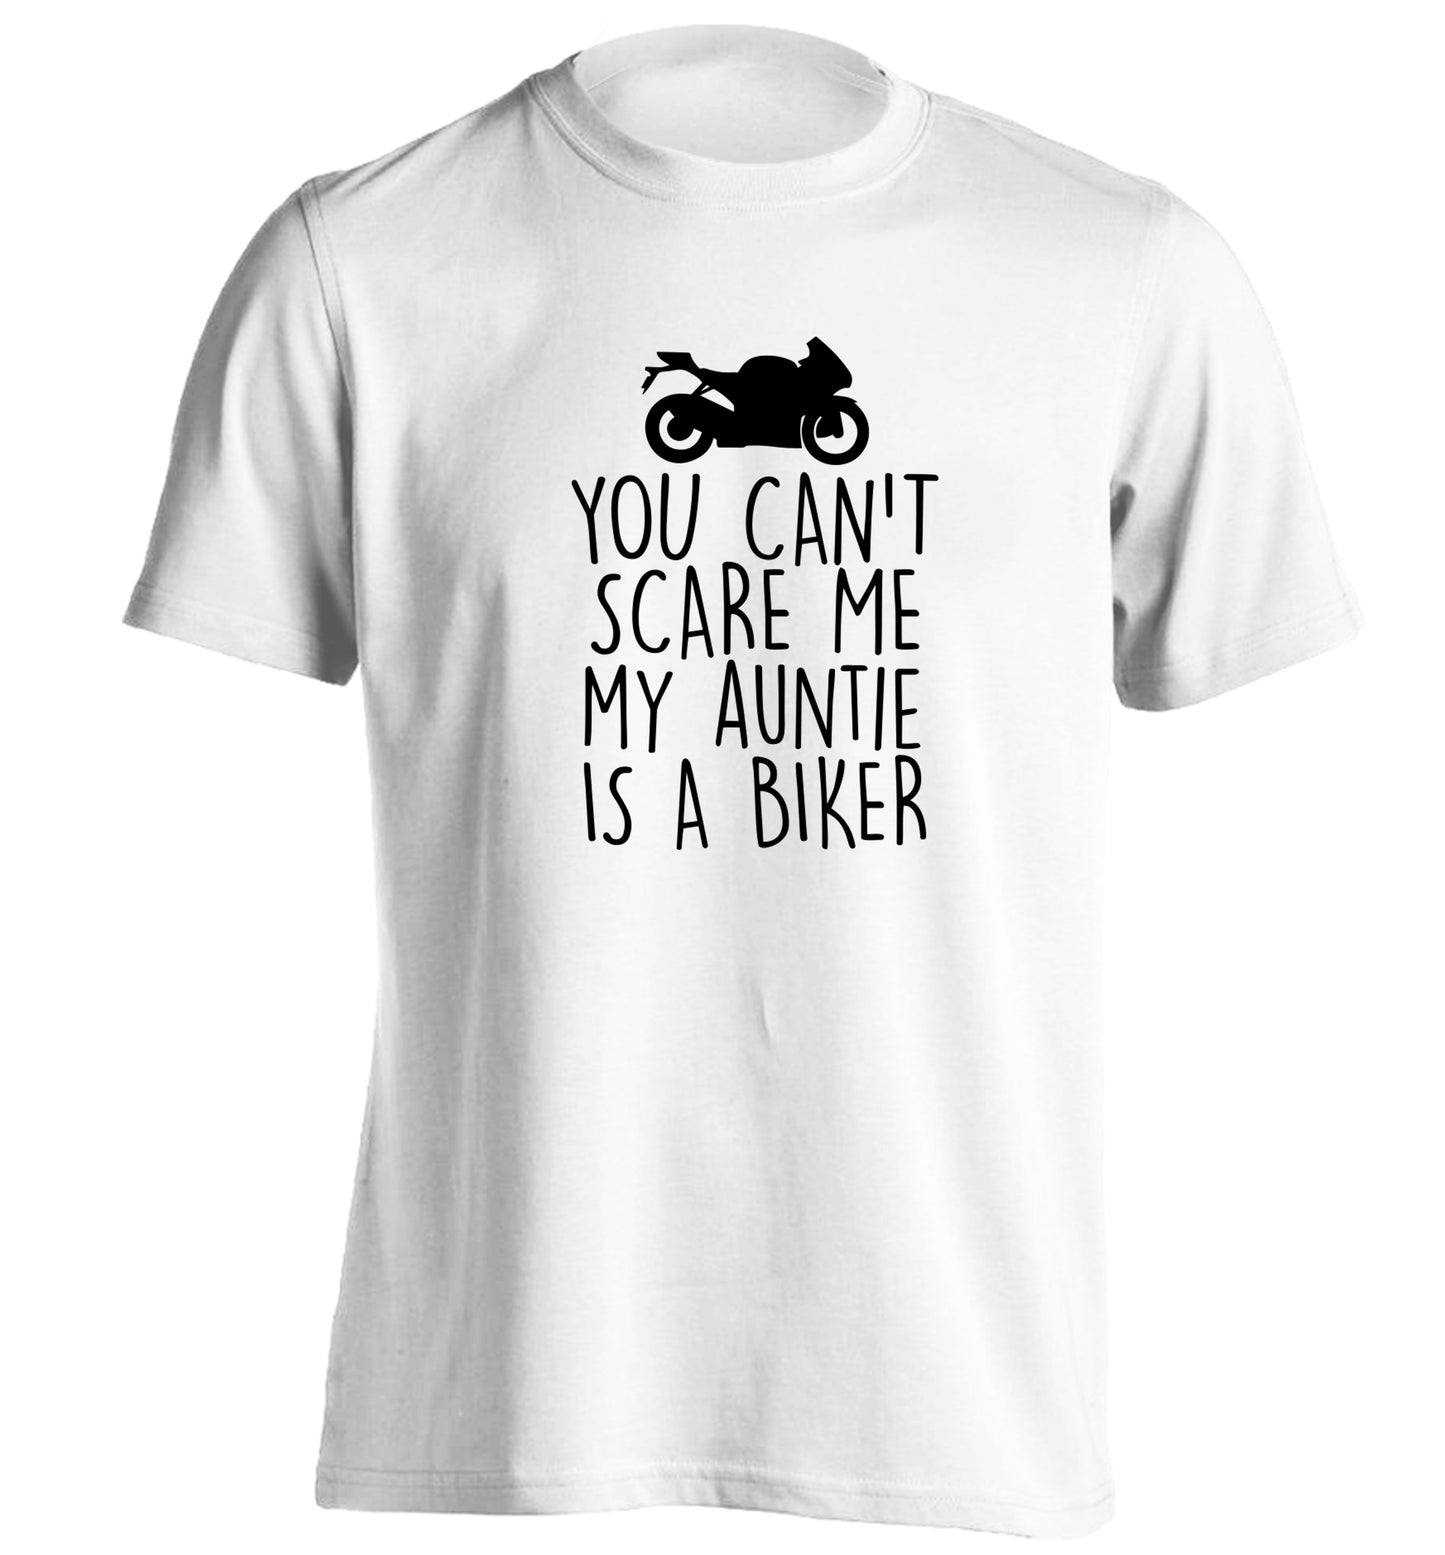 You can't scare me my auntie is a biker adults unisex white Tshirt 2XL